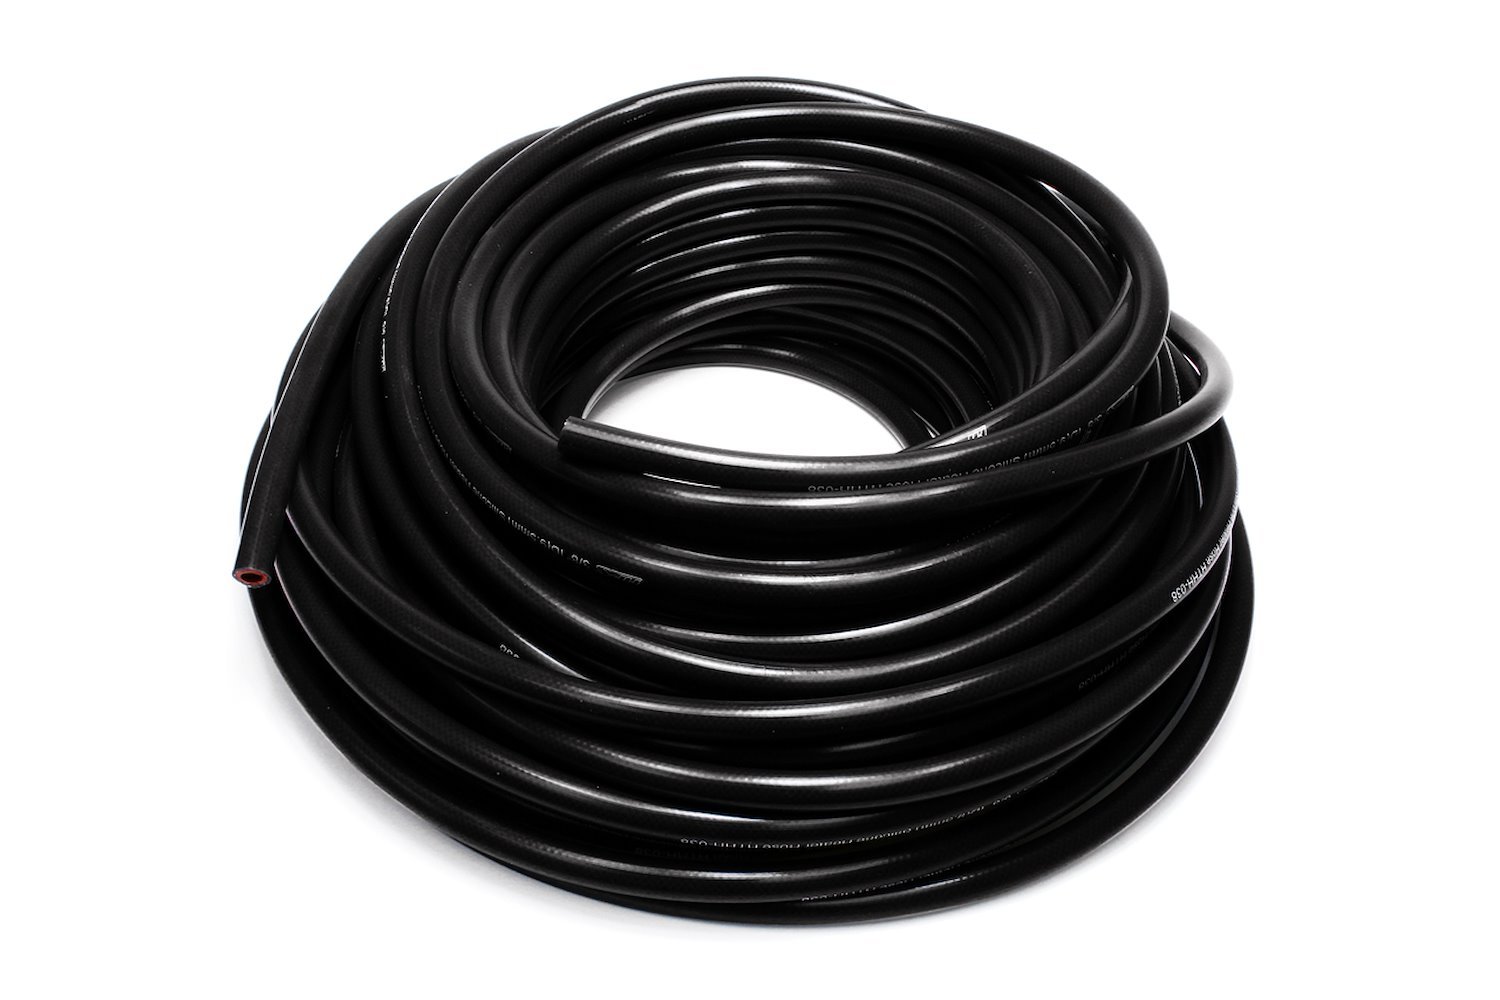 HTHH-025-BLKx100 Silicone Heater Hose Tubing, High-Temp Reinforced, 1/4 in. ID, 100 ft. Roll, Black